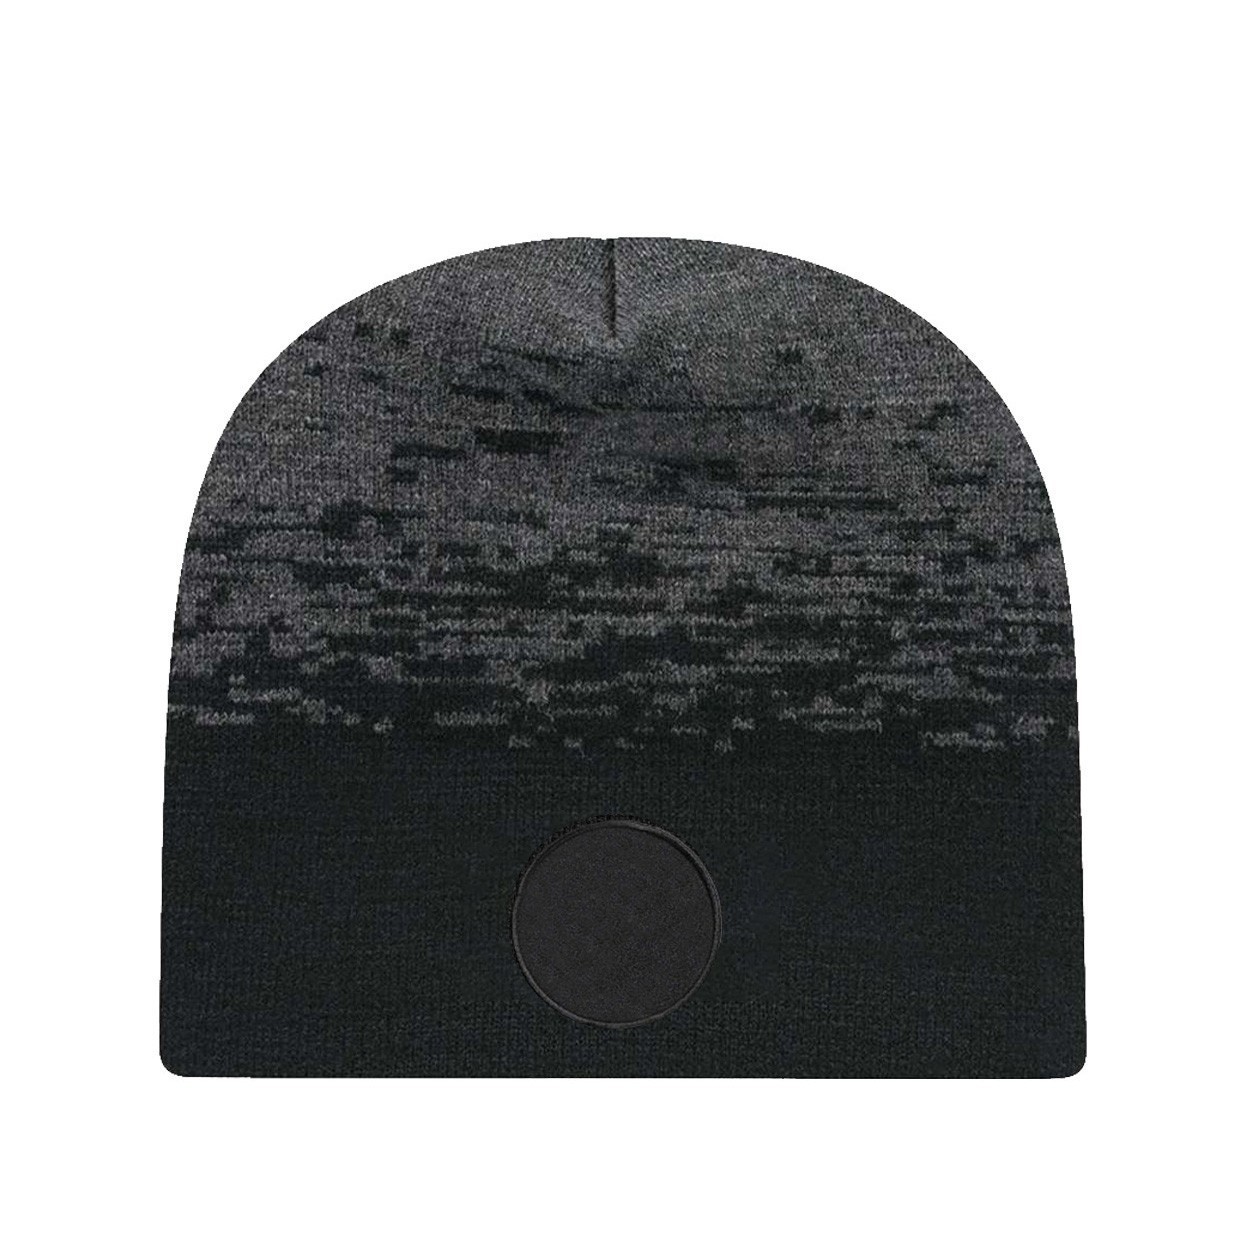 Product Details: Classic Circle Patch Static Beanie Black/Dark Heather Grey (CAP AMERICA - USA-Made Static Beanie - RKS9) (Copy)